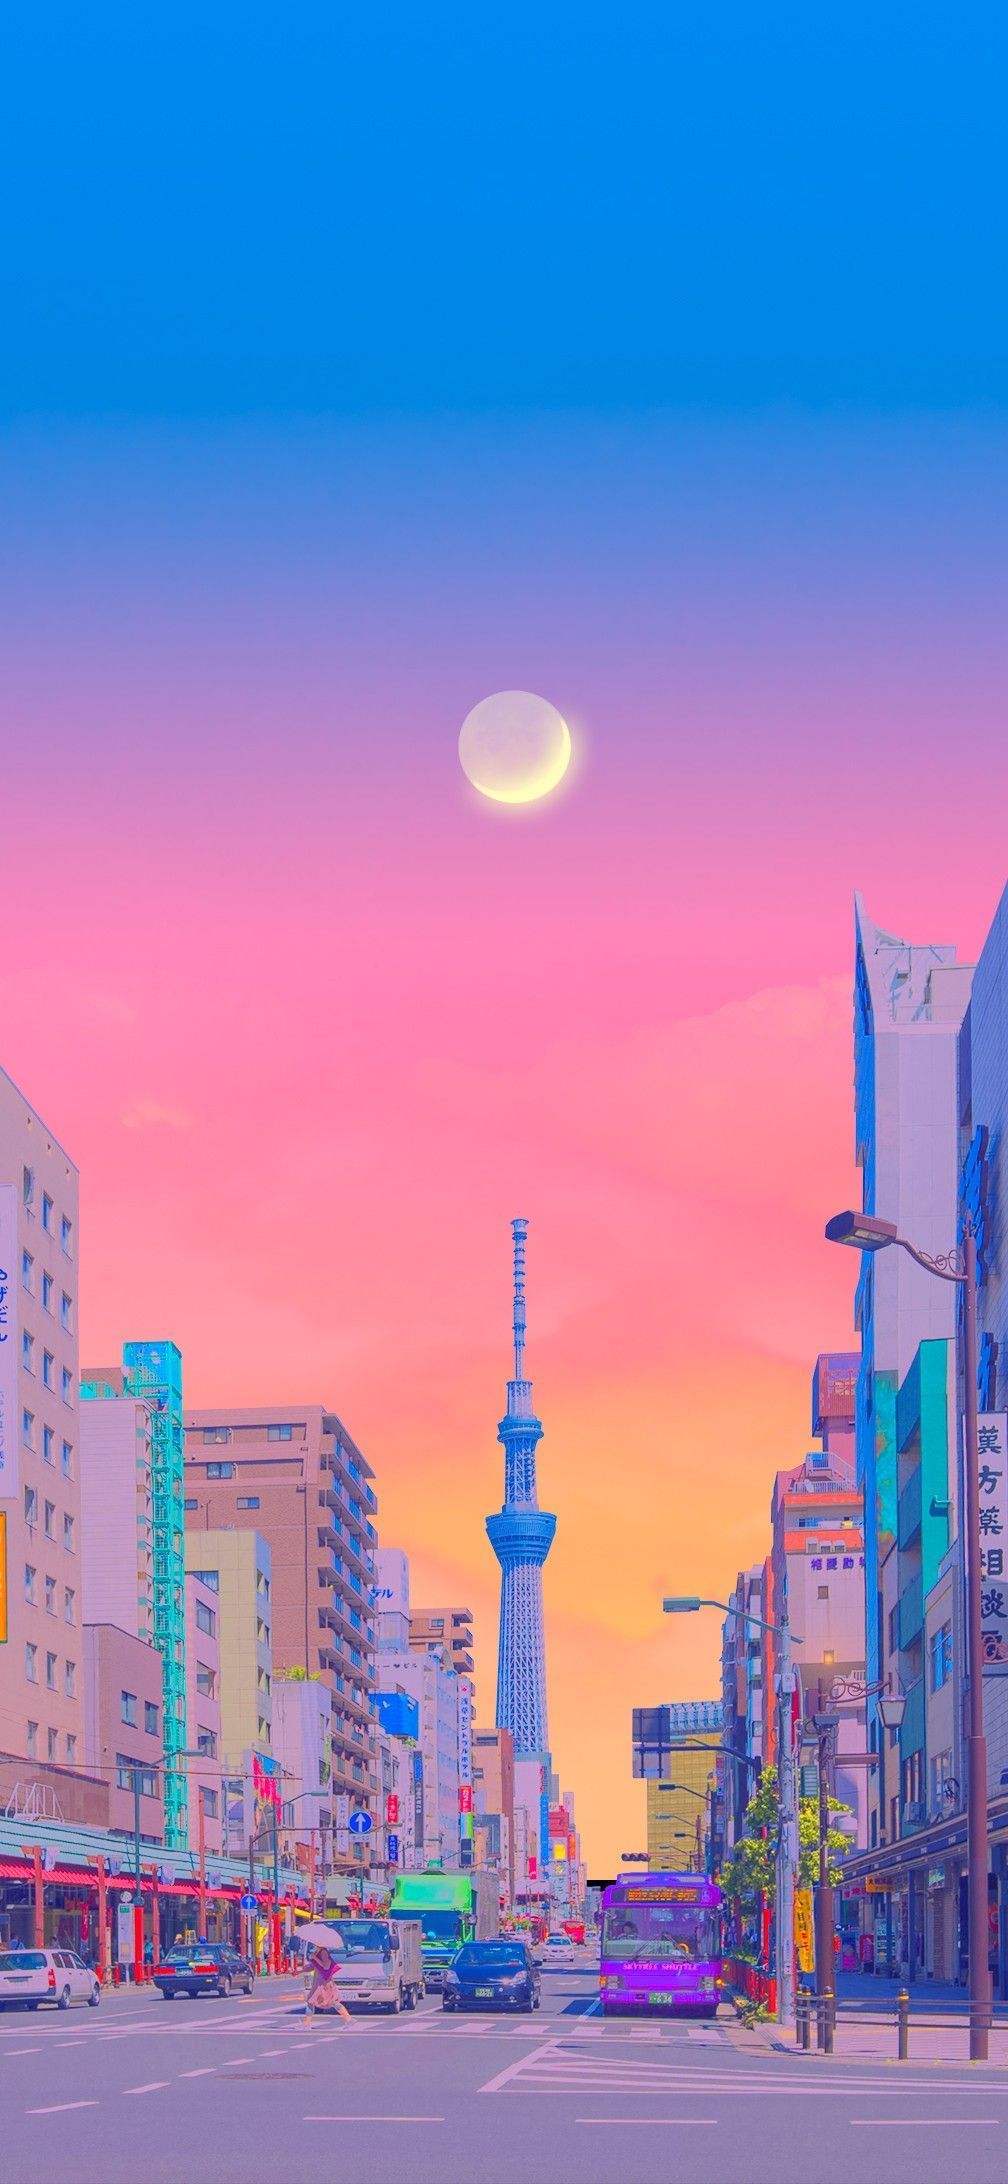 Aesthetic cityscape wallpaper for iPhone with a full moon - Tokyo